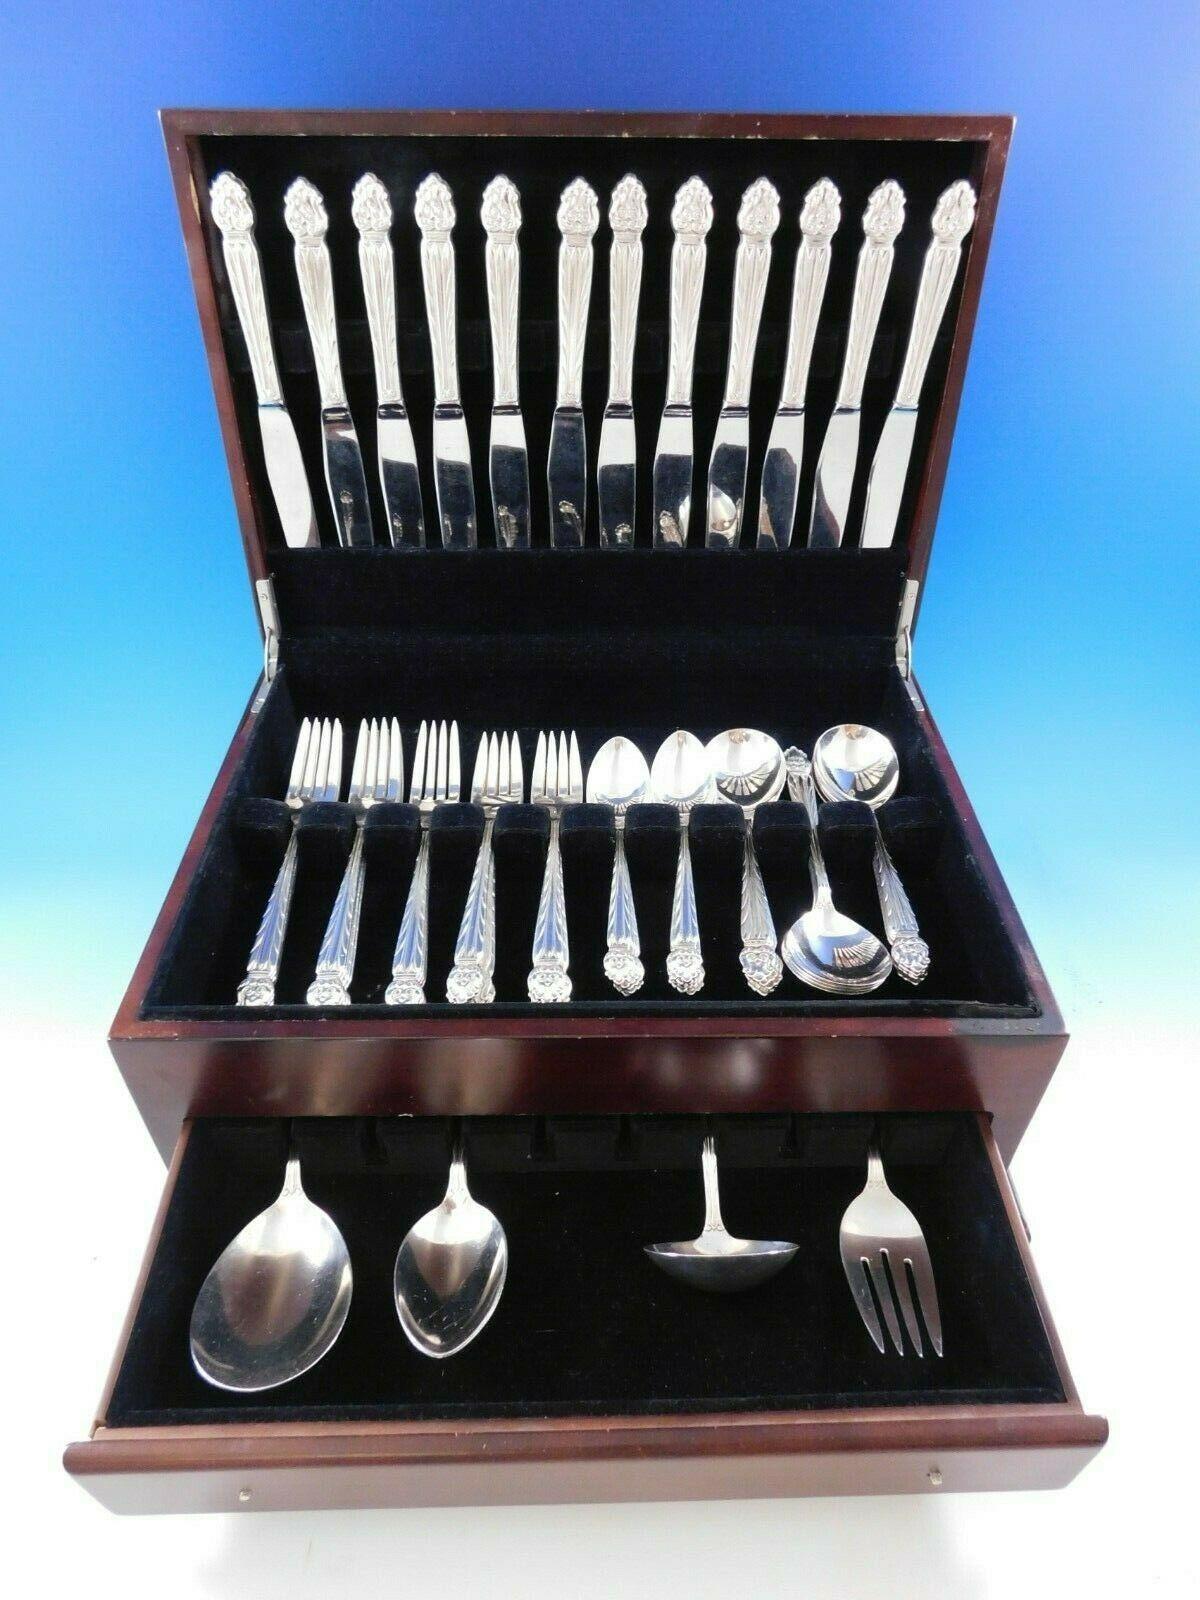 Intermezzo by National sterling silver flatware set with Scandinavian-style design, 65 pieces. This set includes:

12 dinner size knives, 9 5/8